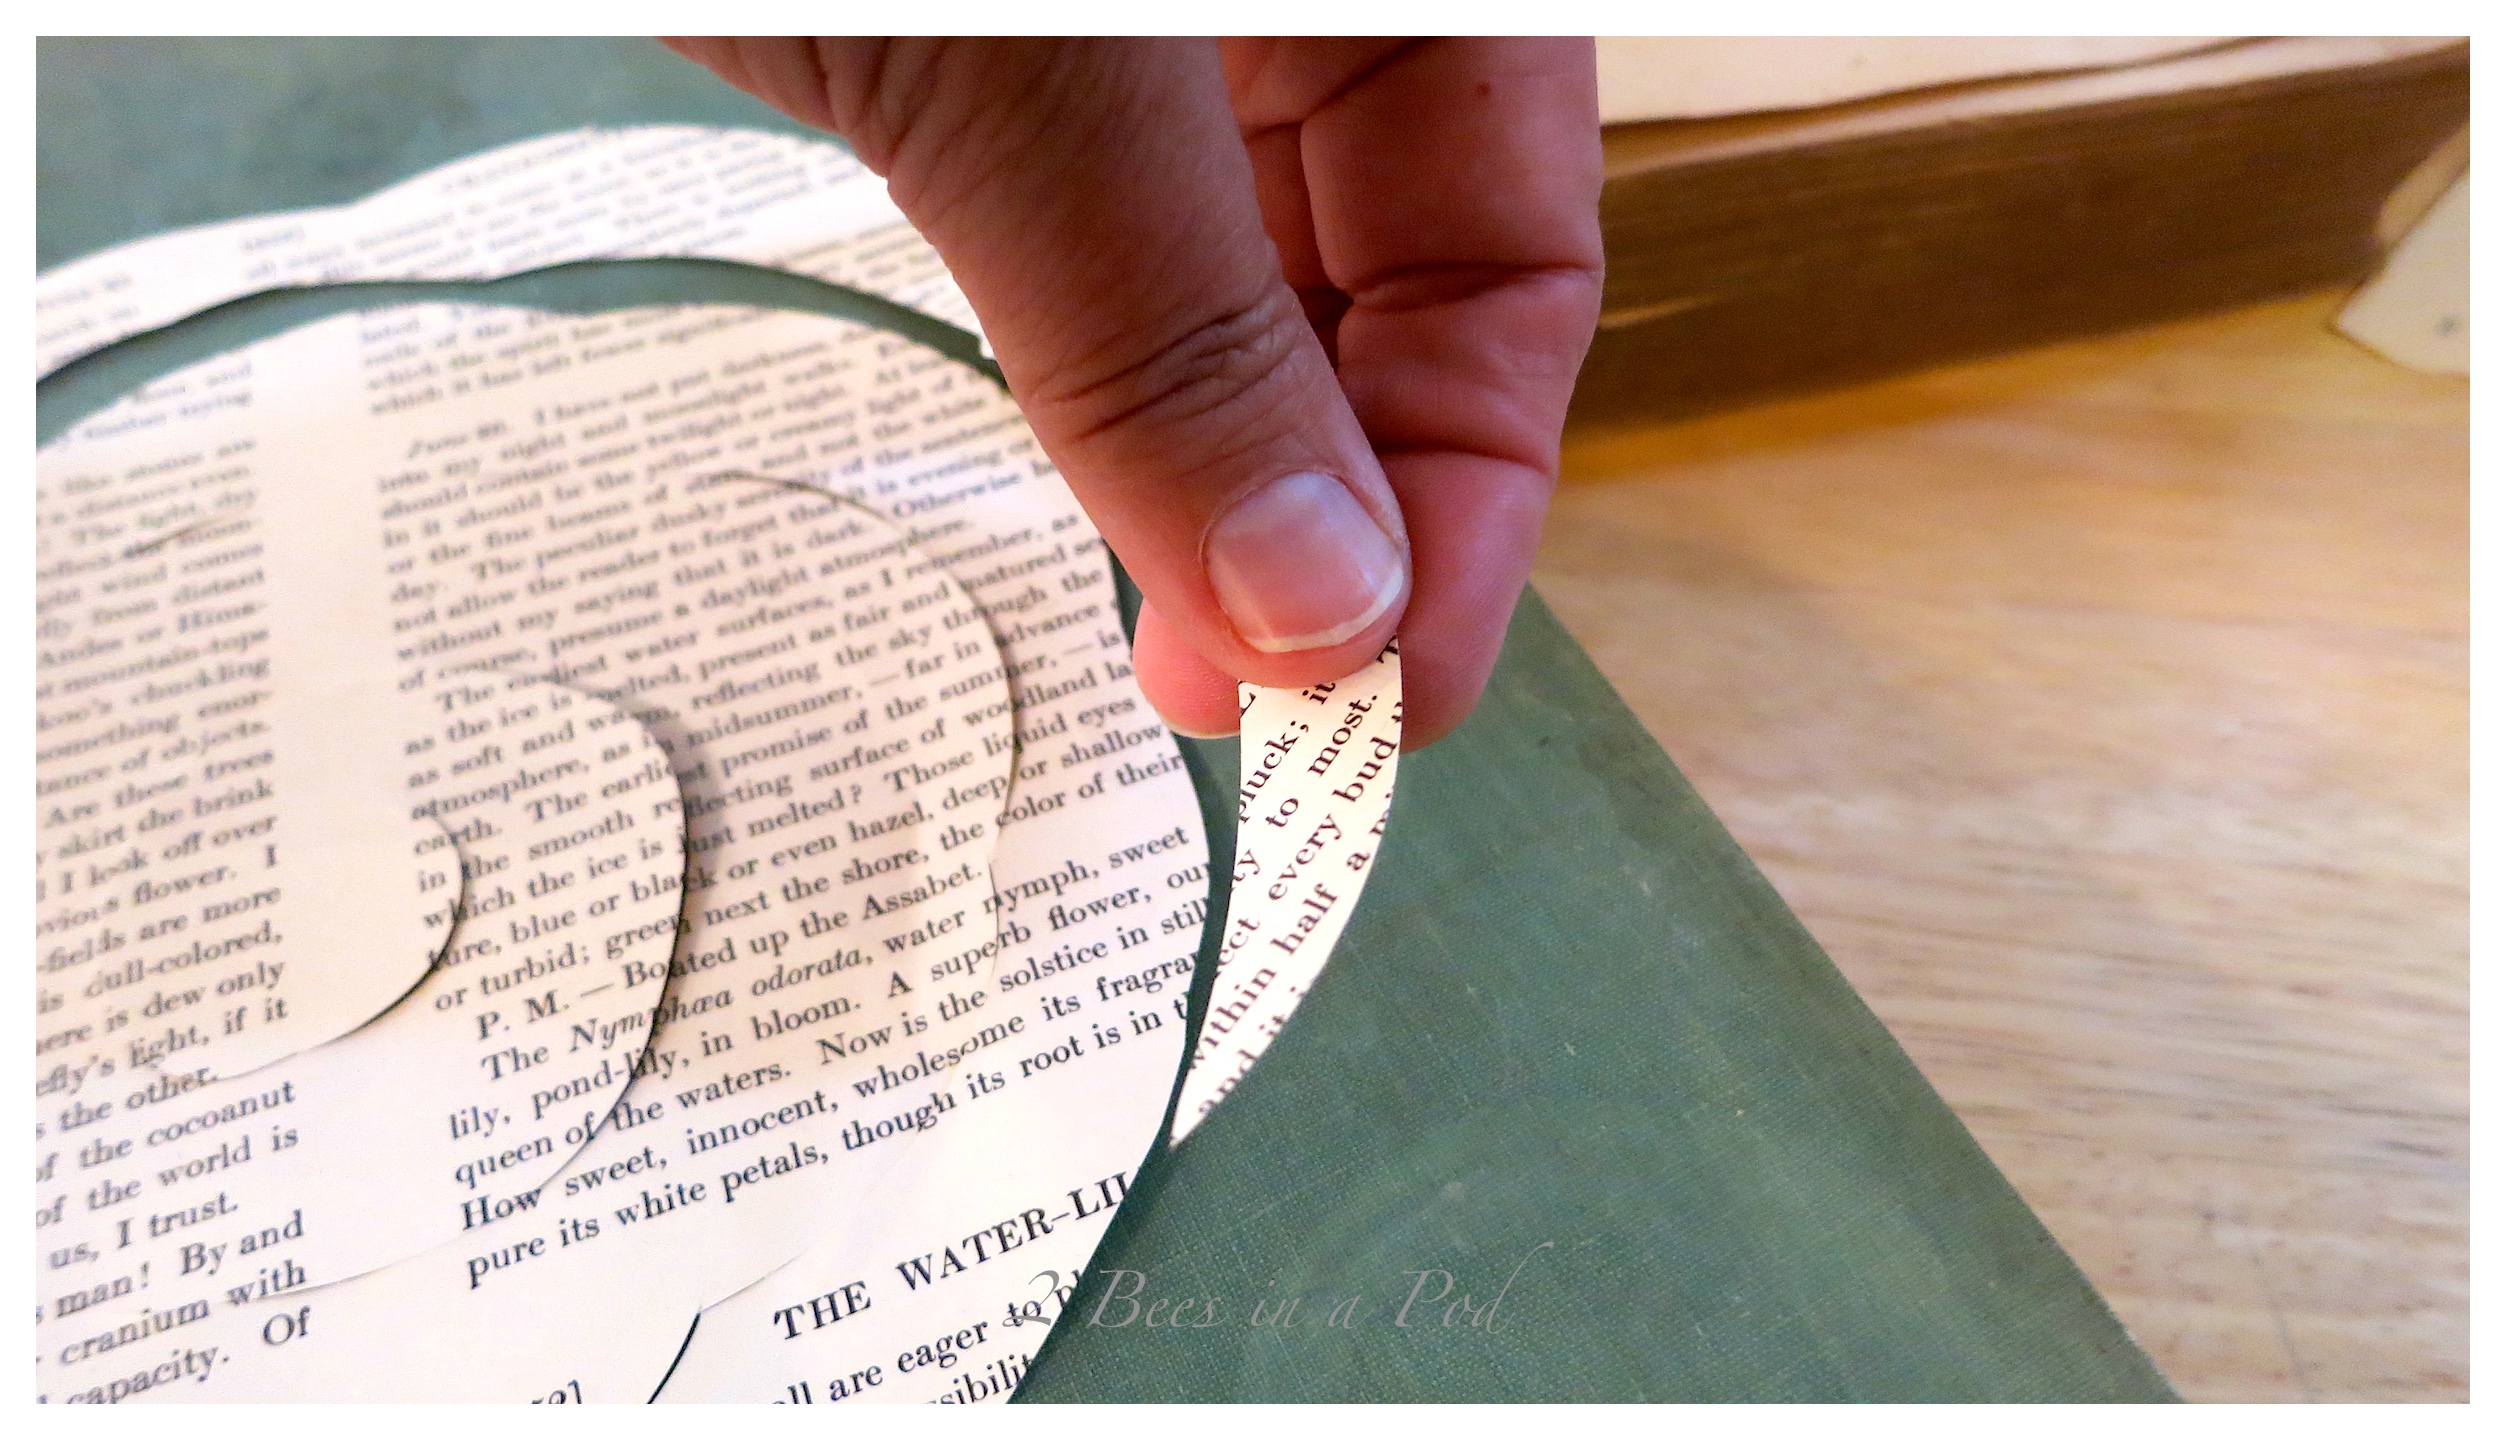 DIY - paper roses made from vintage book page. An easy, simple to follow tutorial.